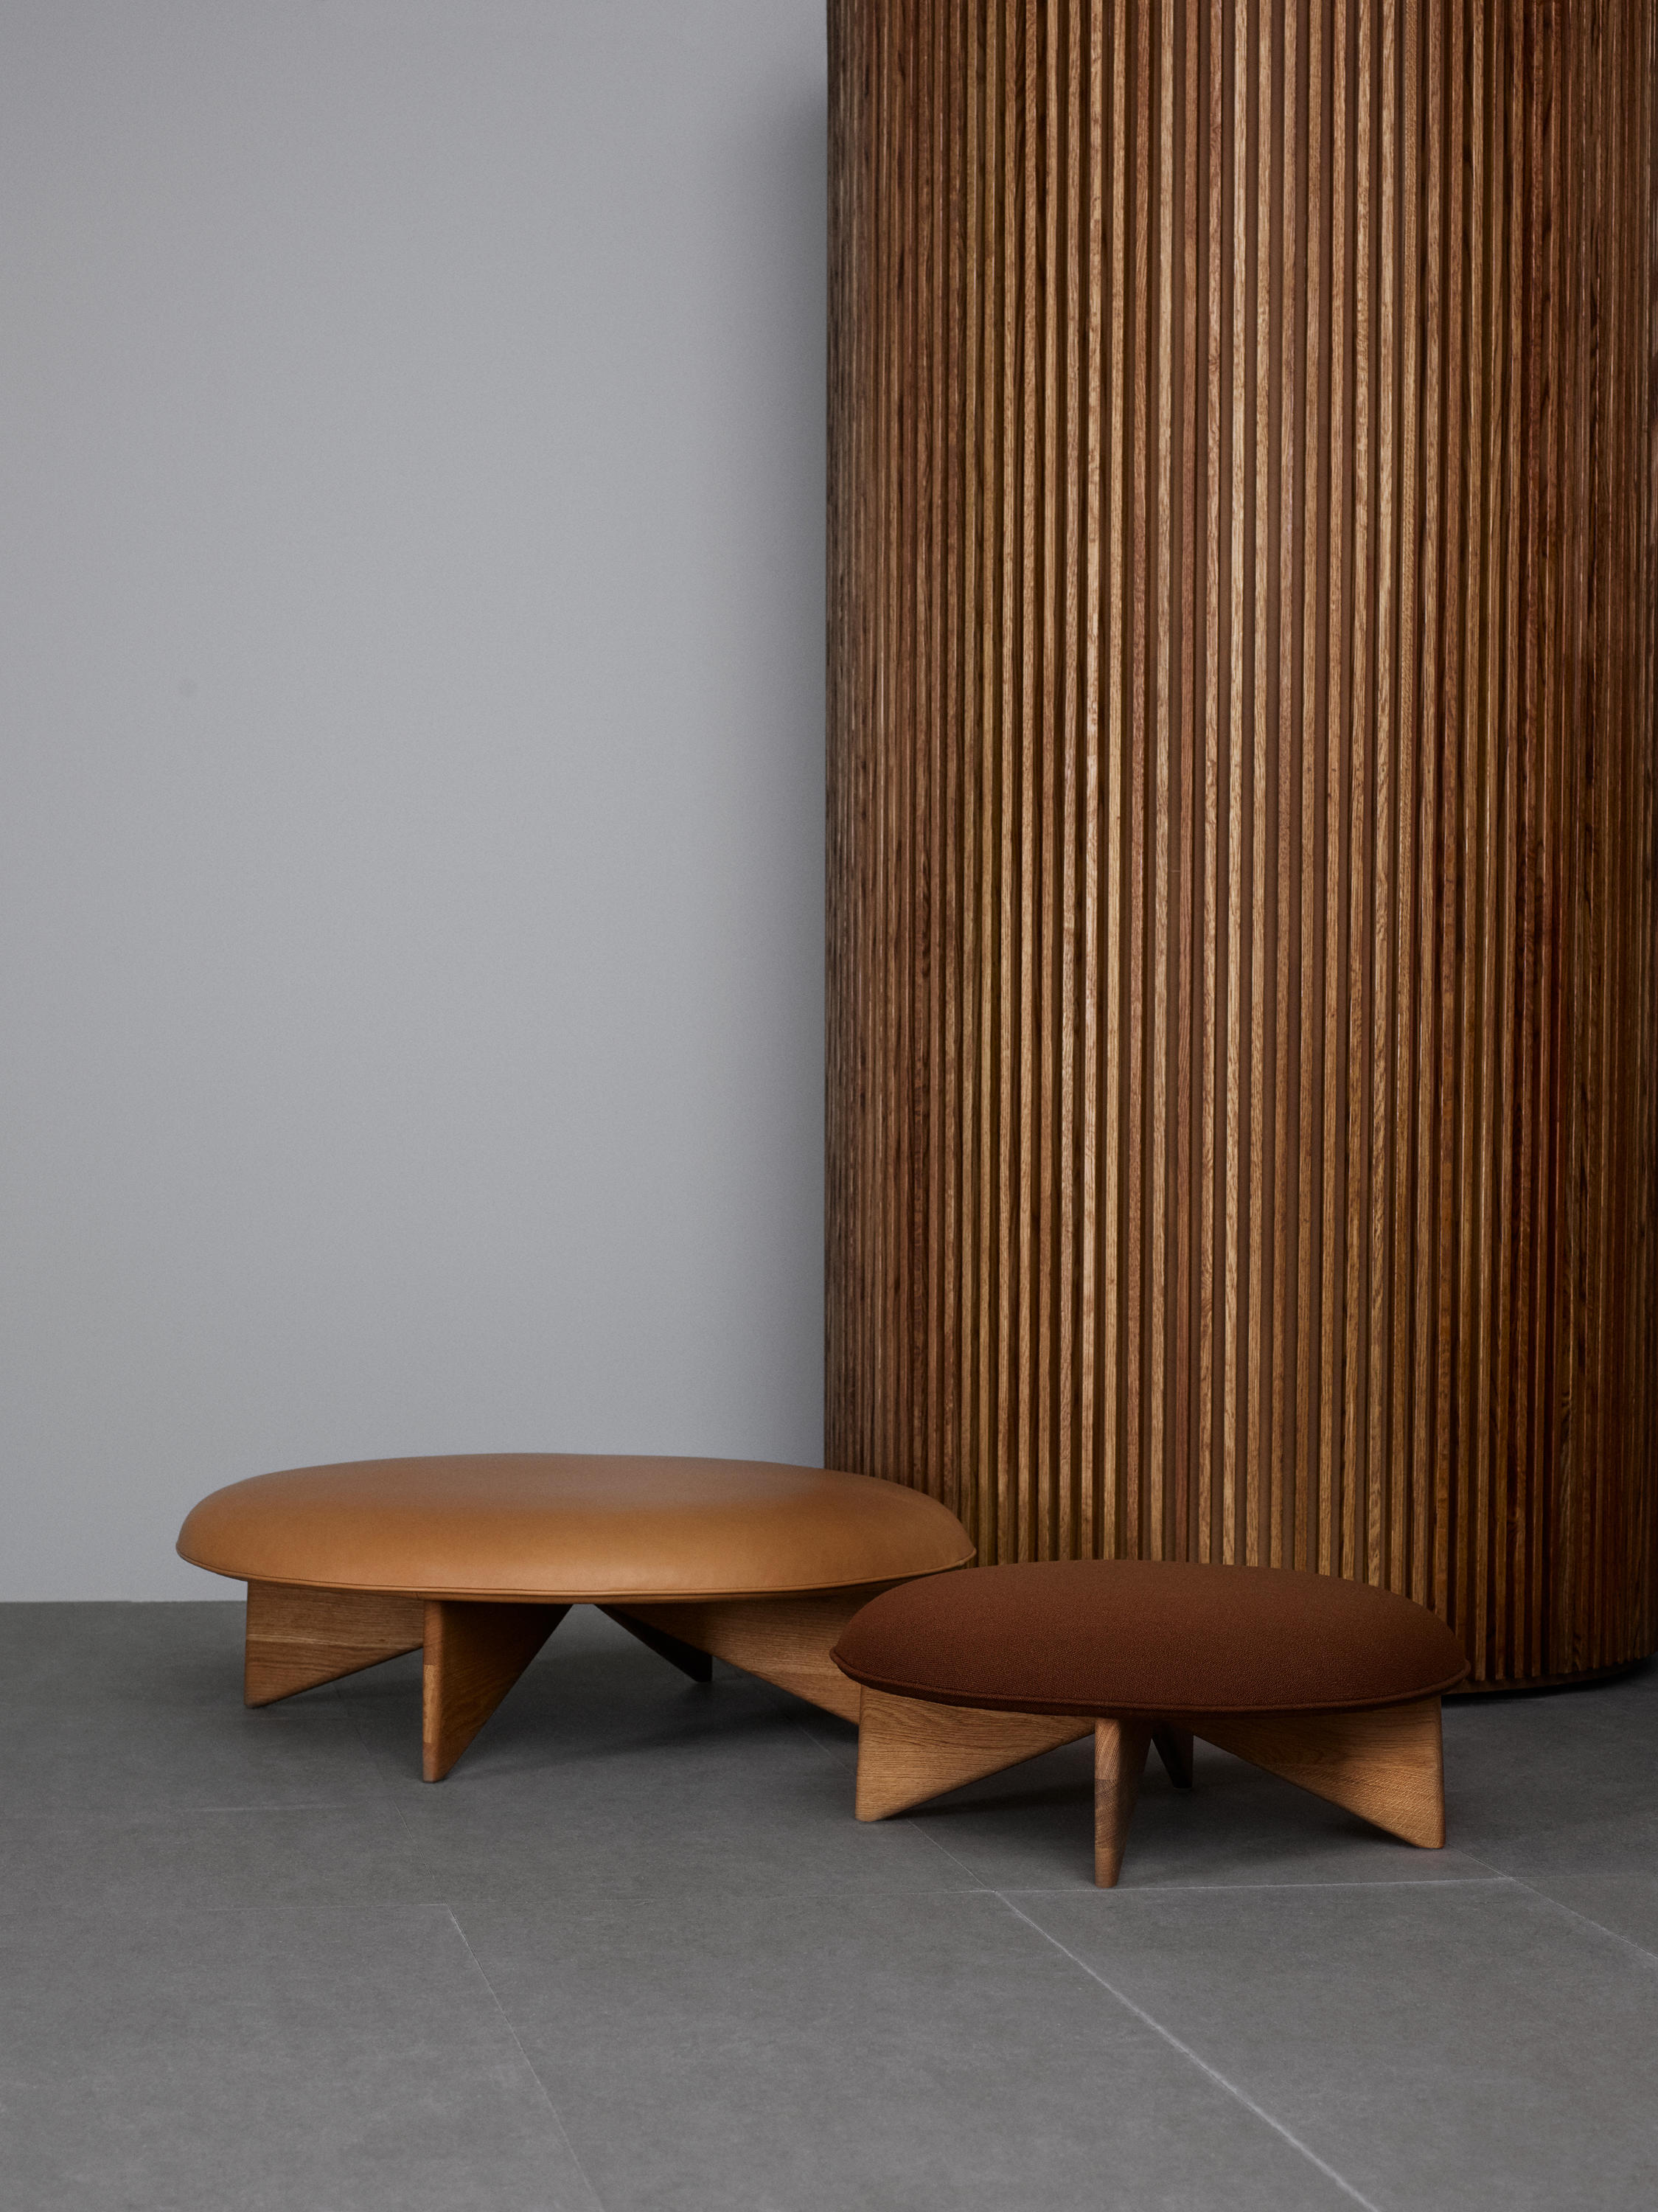 Utility Stool by Norm for Fogia